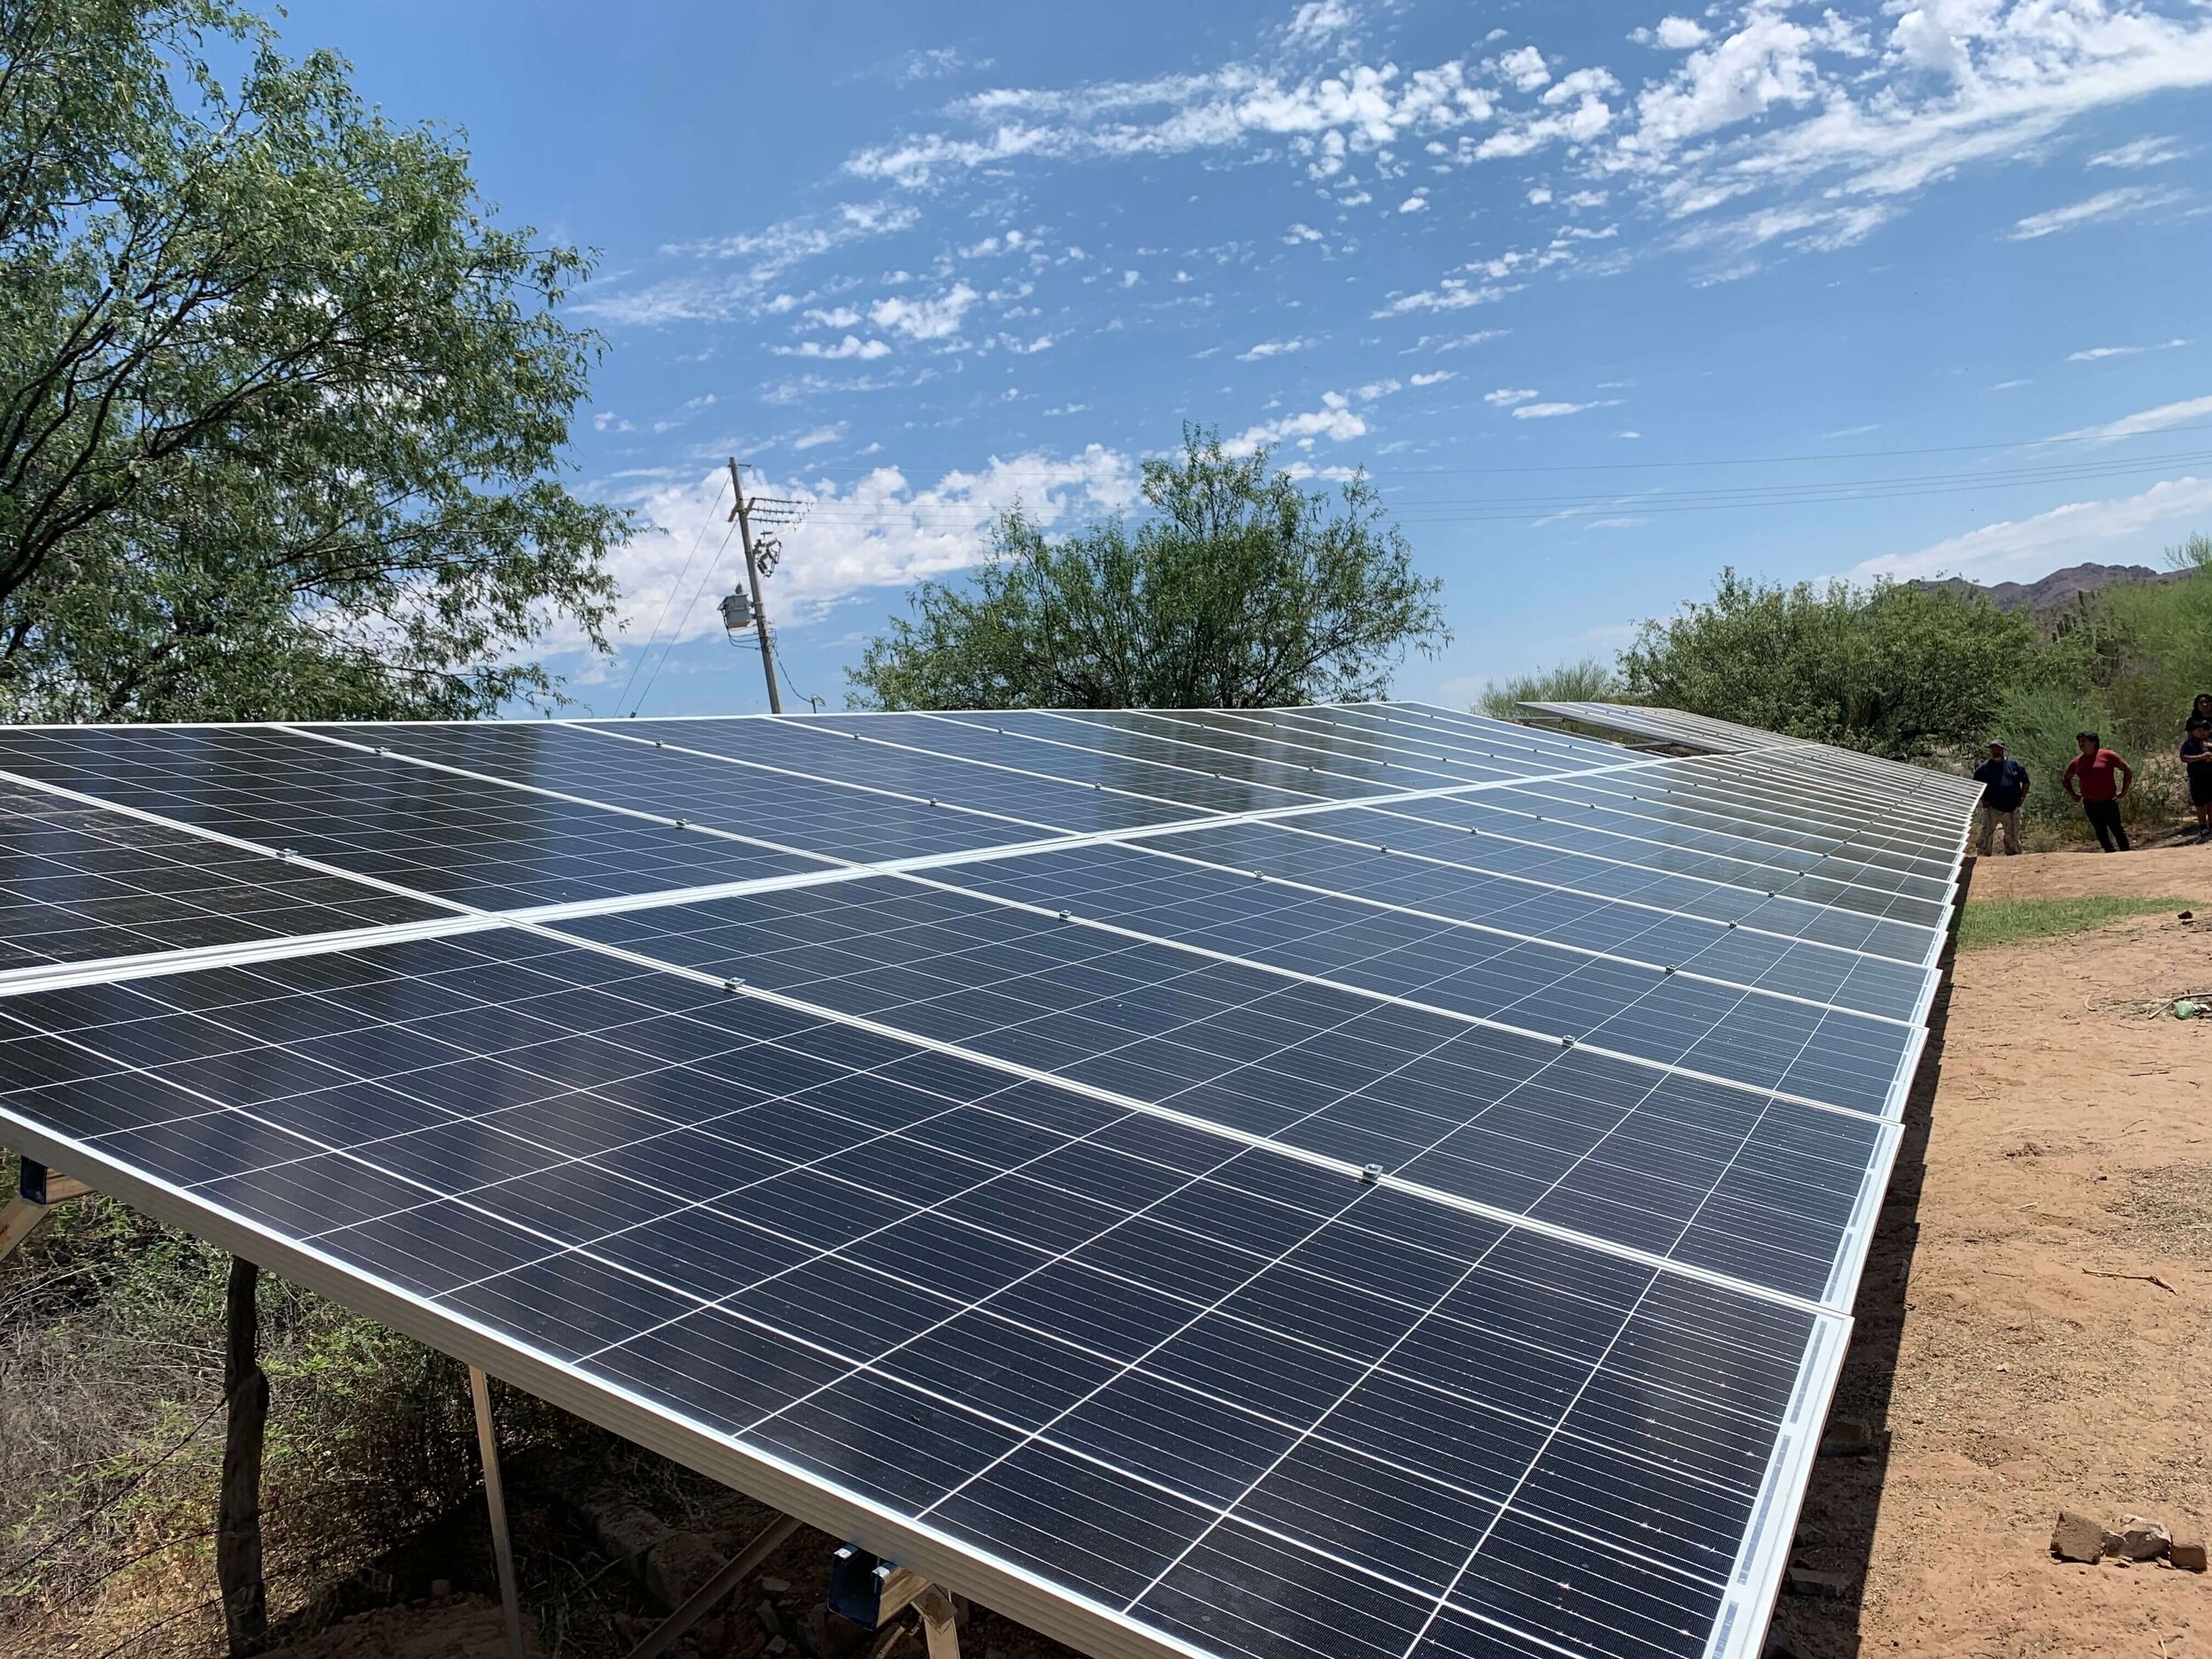  This solar system will soon power a solar water pumping system for the Seri Indian tribe in Northern Mexico.  Photo by Borderlands Restoration Network 